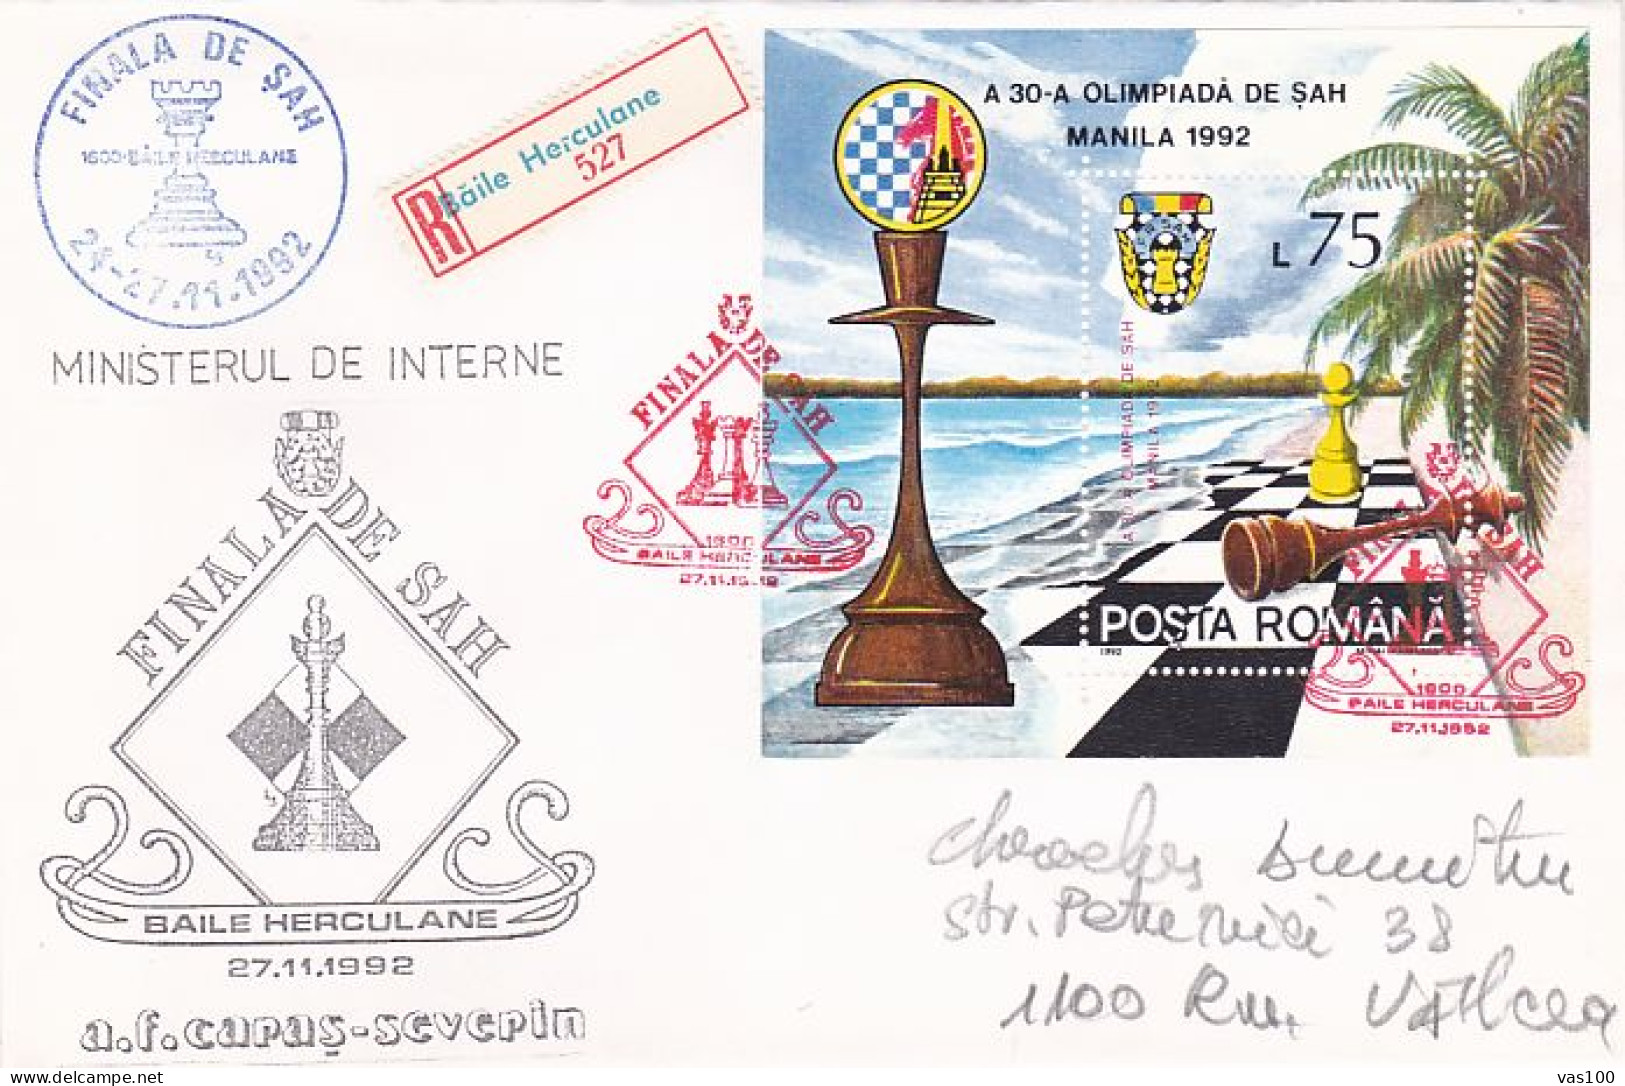 GAMES, CHESS, BAILE HERCULANE CHESS TOURNAMENT FINALS, MANILA OLYMPIAD STAMP SHEET, REG SPECIAL COVER, 1992, ROMANIA - Chess